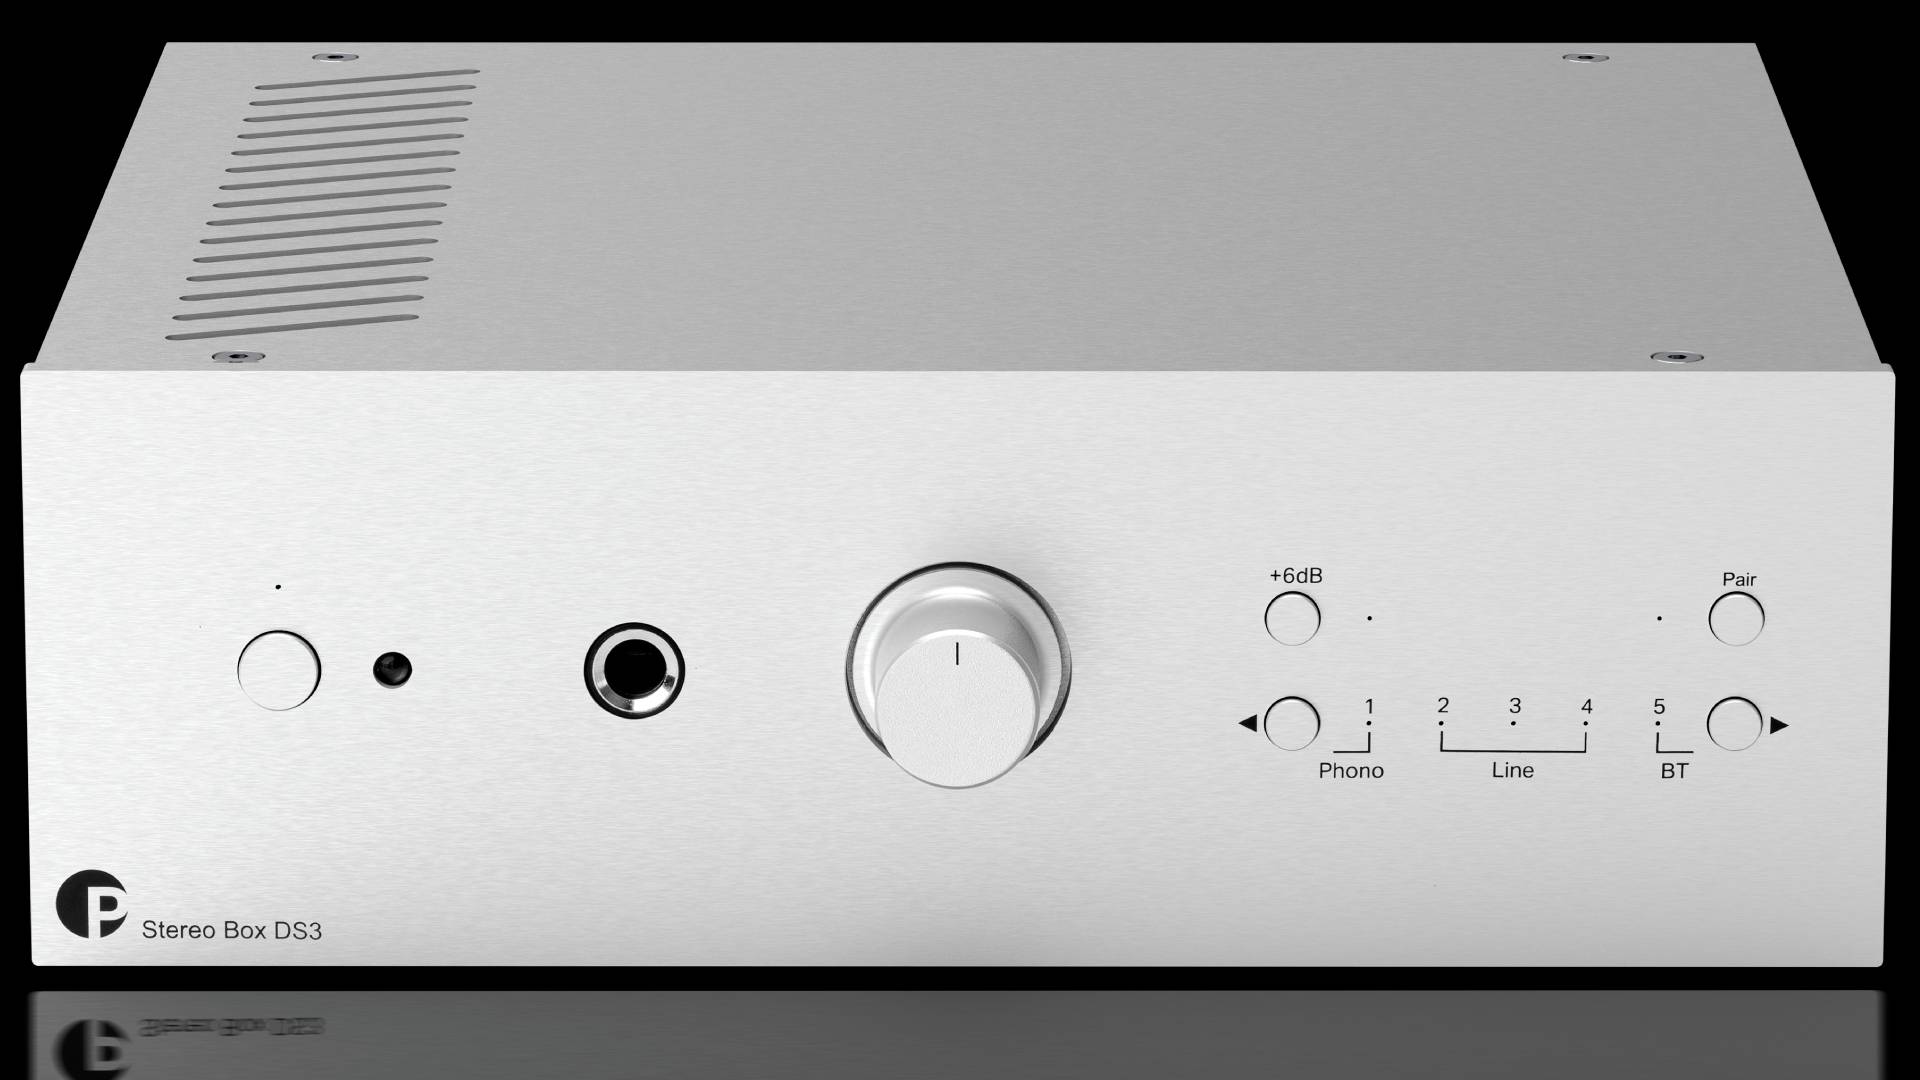 The new Pro-Ject Stereo Box DS3 (Image Credit: Pro-Ject)